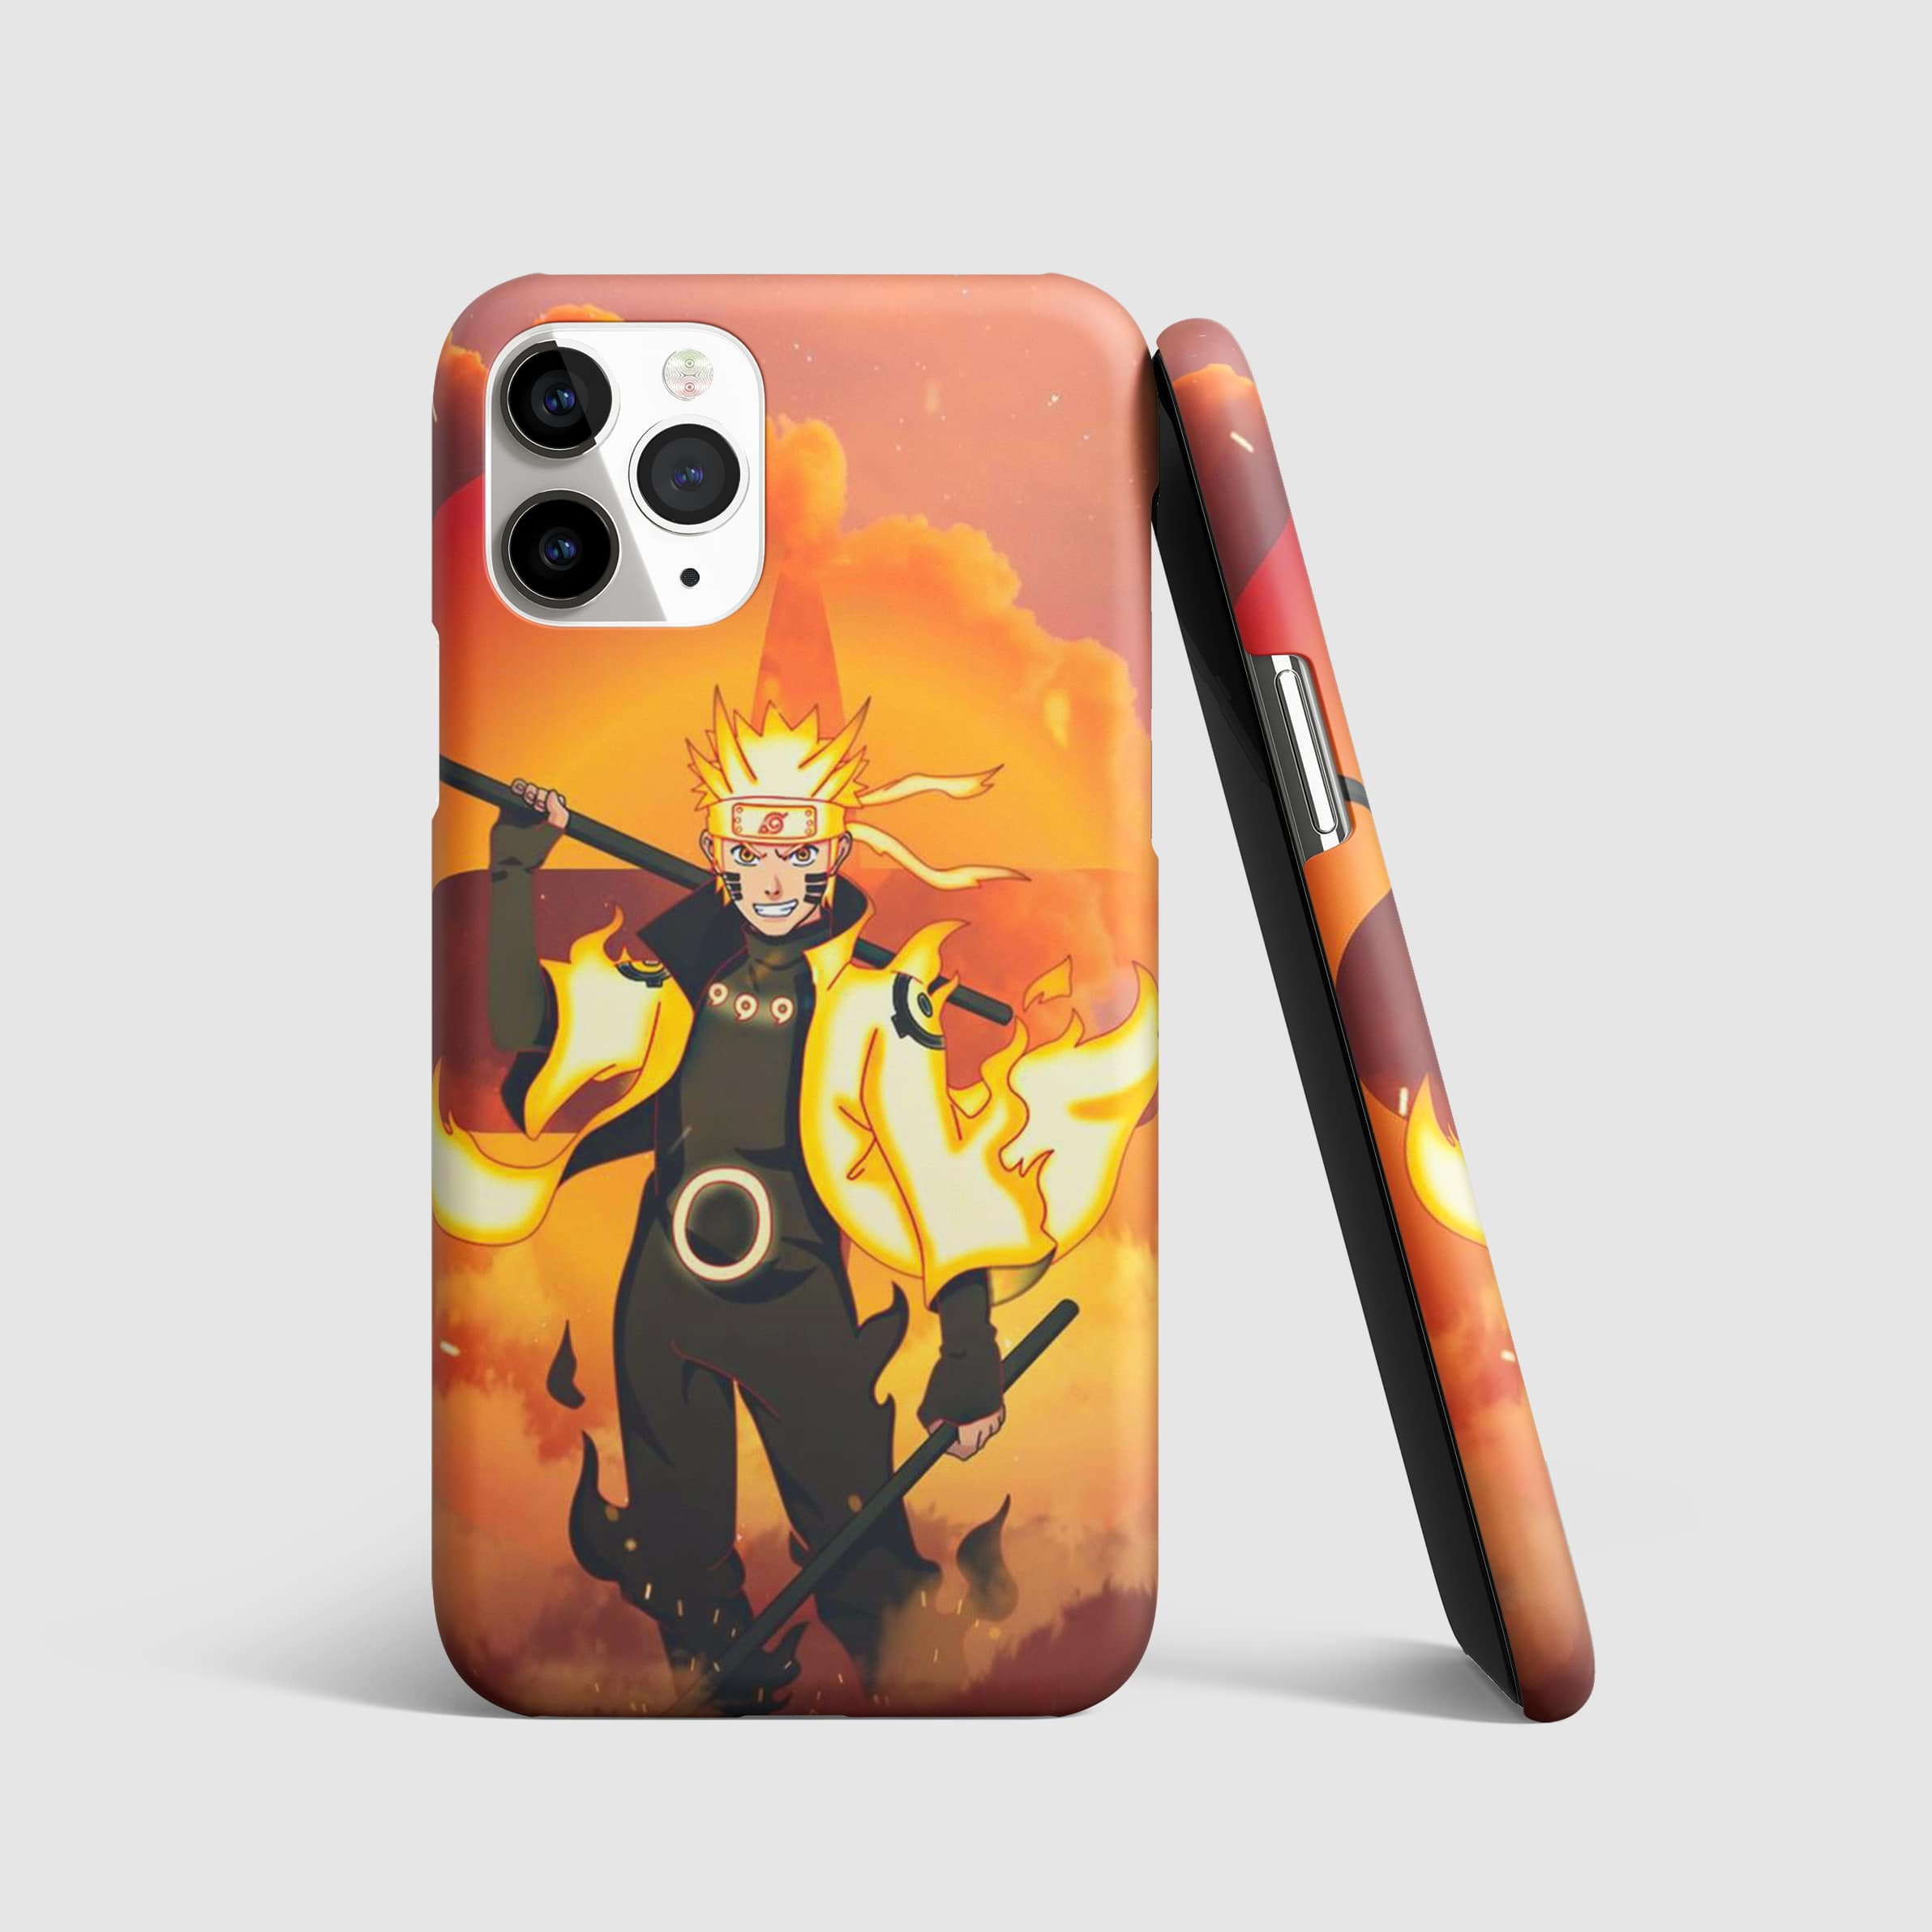 Naruto Chakra Phone Cover with 3D matte finish, featuring the iconic chakra design.